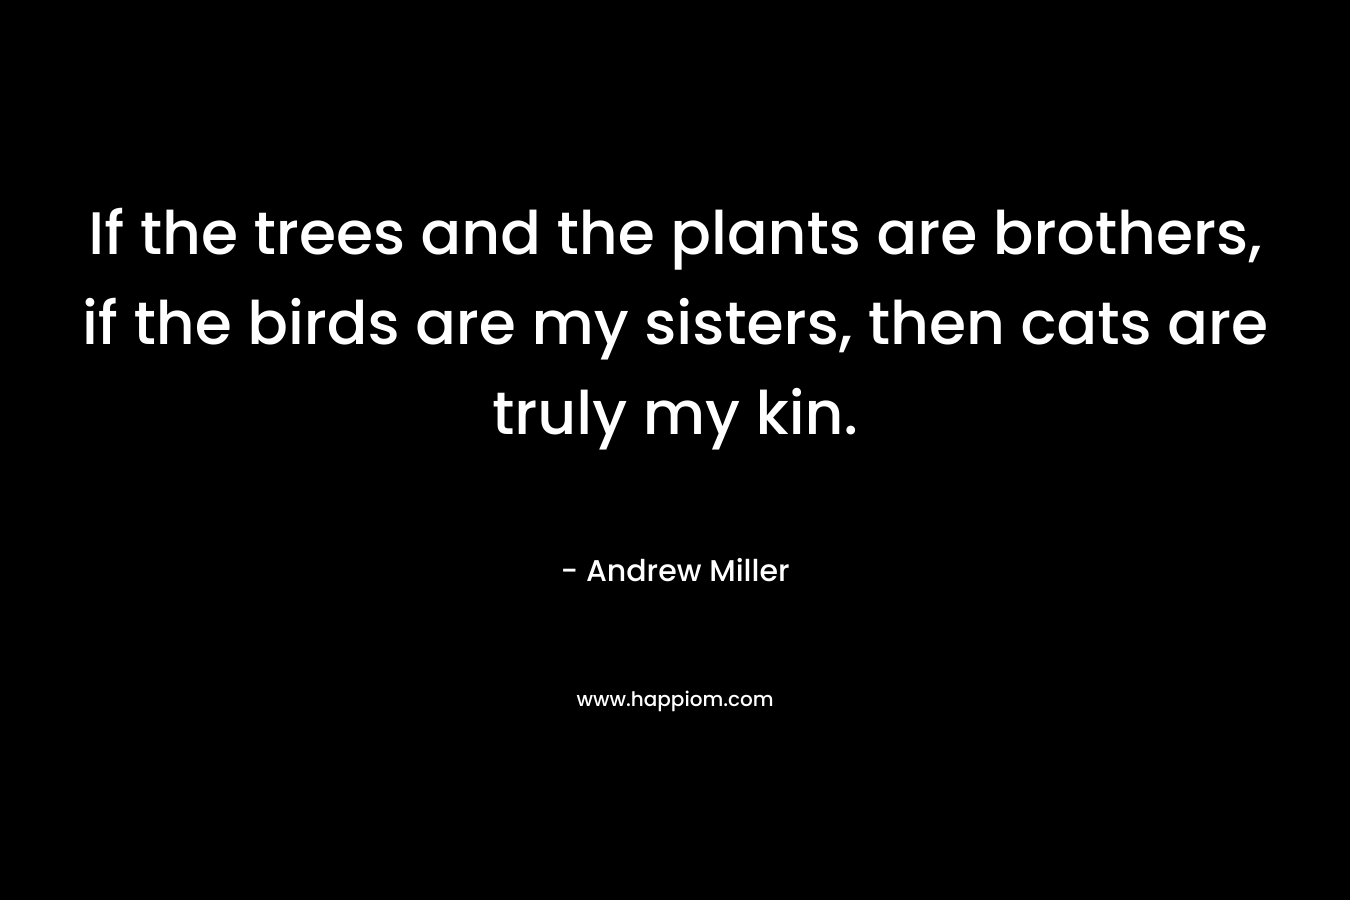 If the trees and the plants are brothers, if the birds are my sisters, then cats are truly my kin.